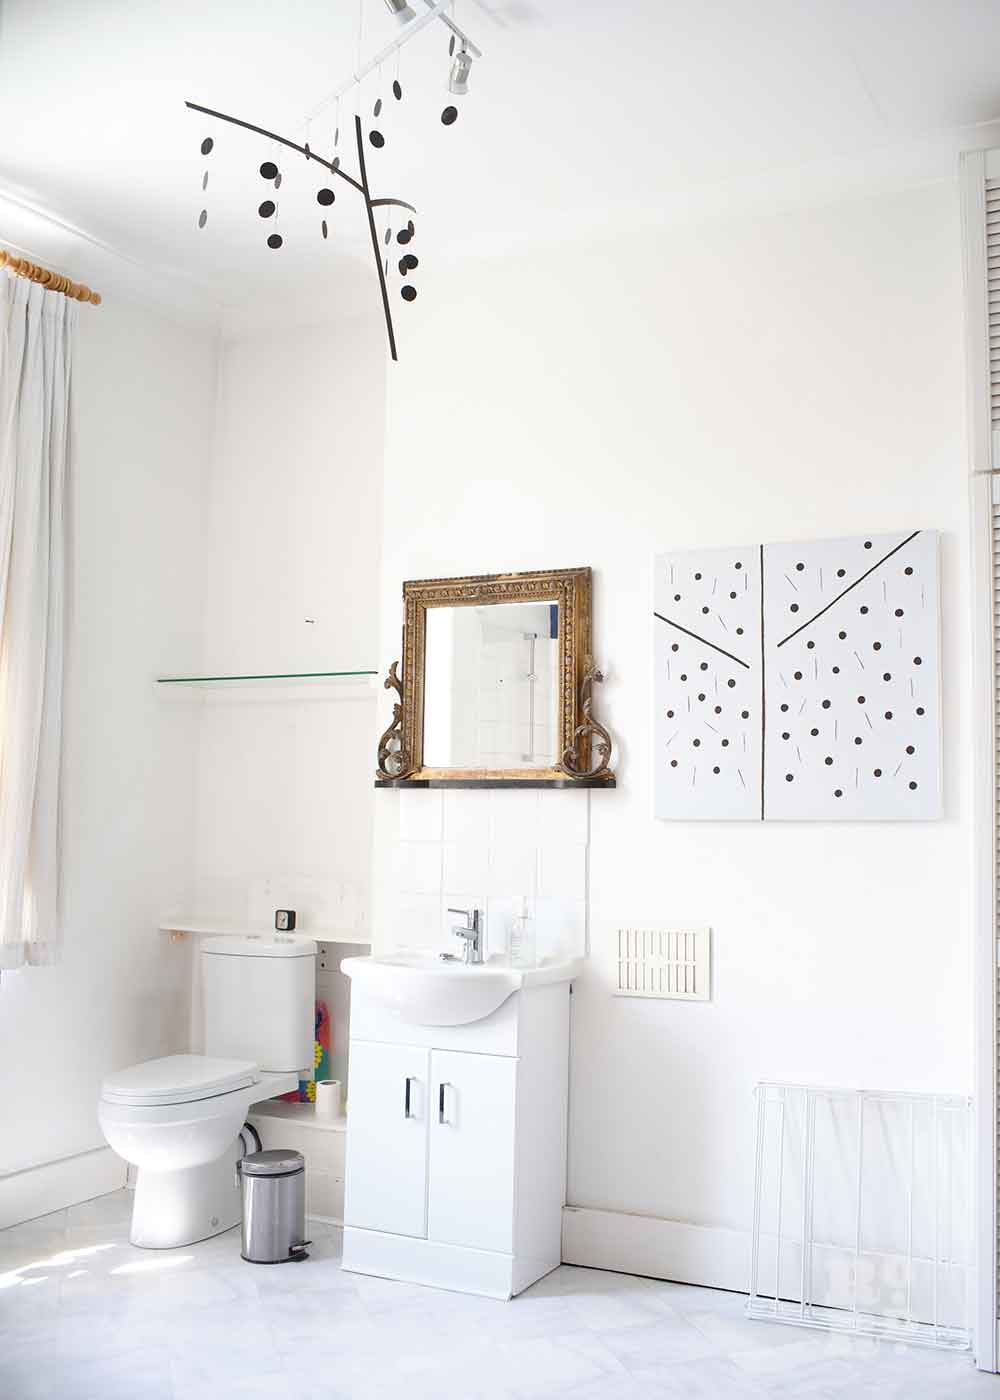 Art hanging in a white bathroom, the home of Bow artist Alice Sielle.